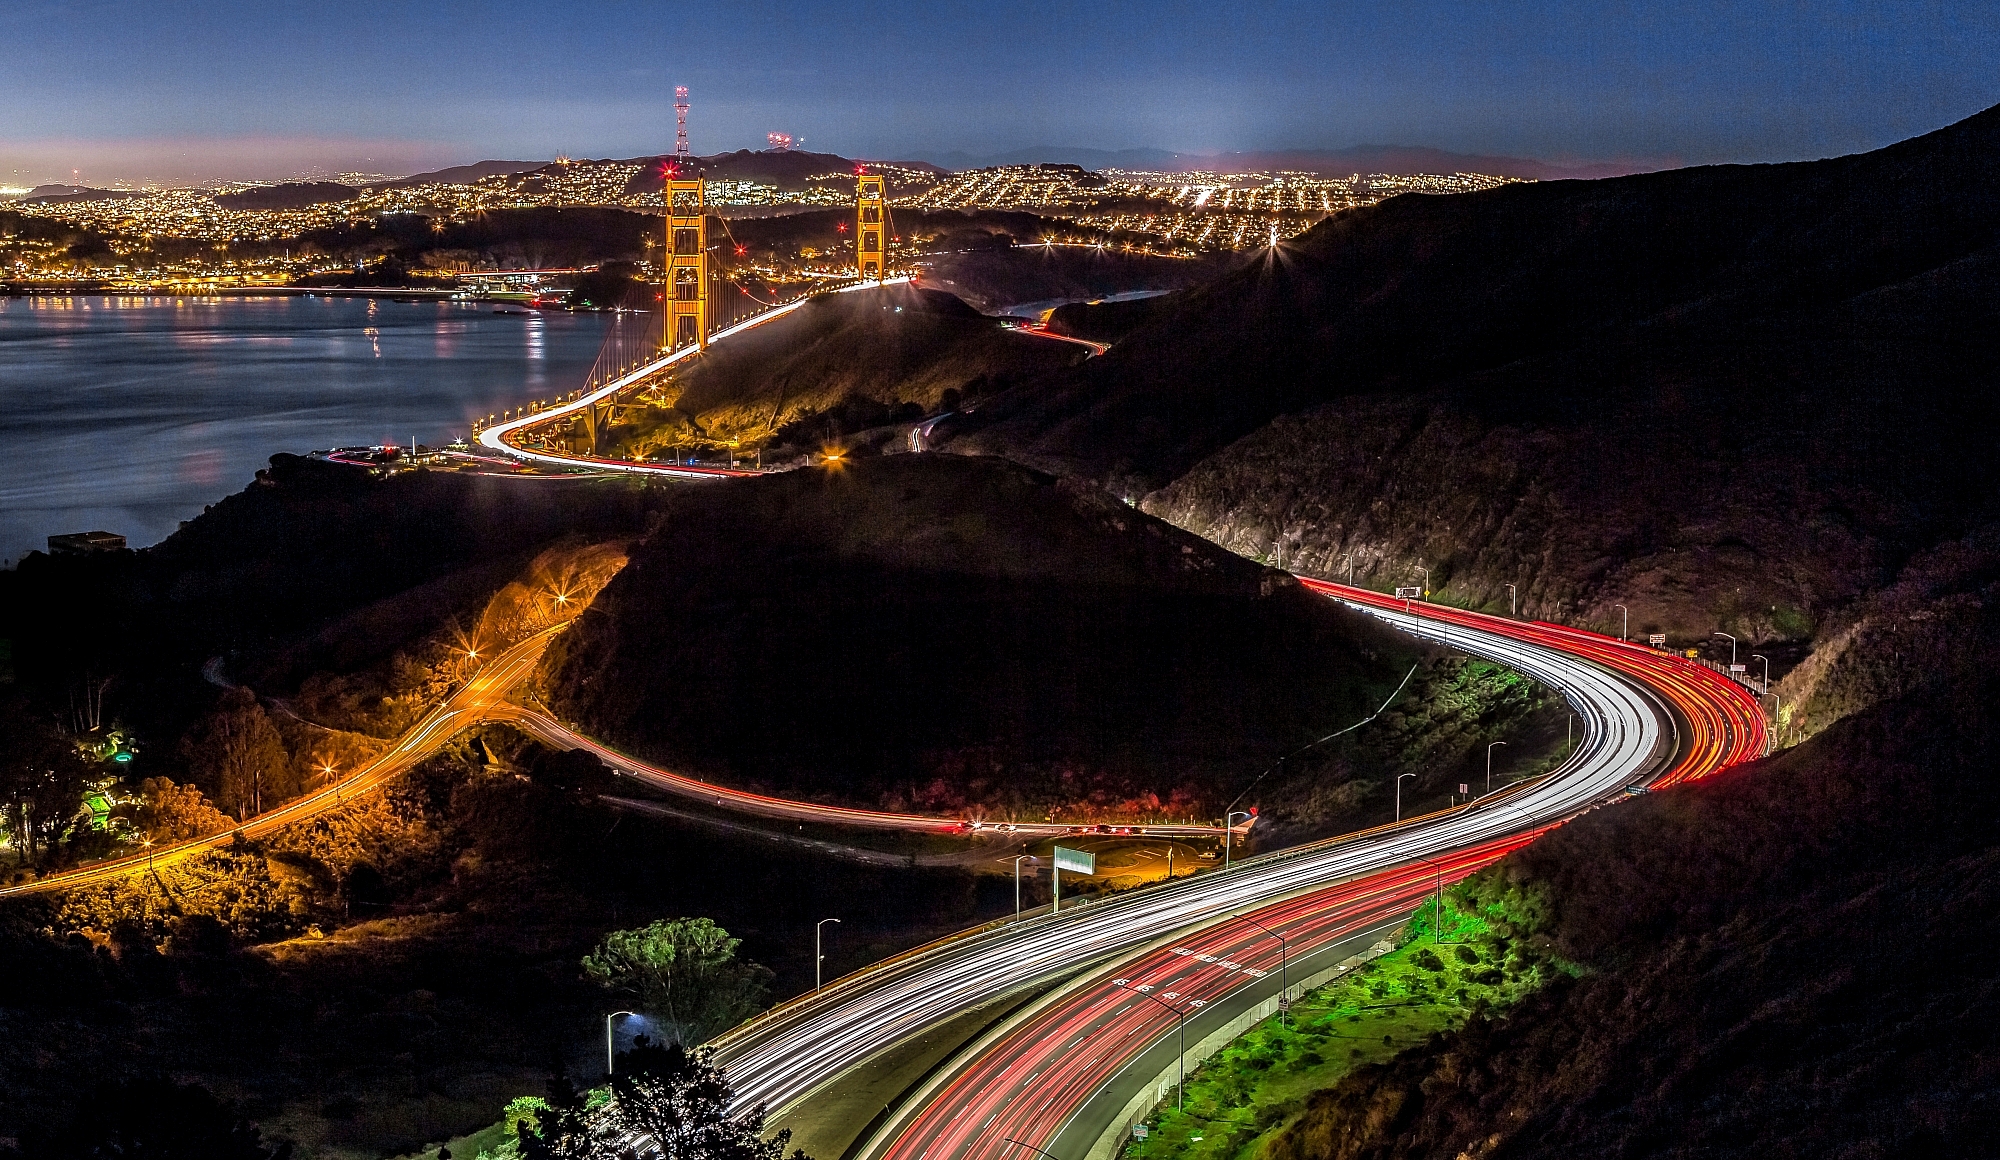 How to Shoot Light Trails